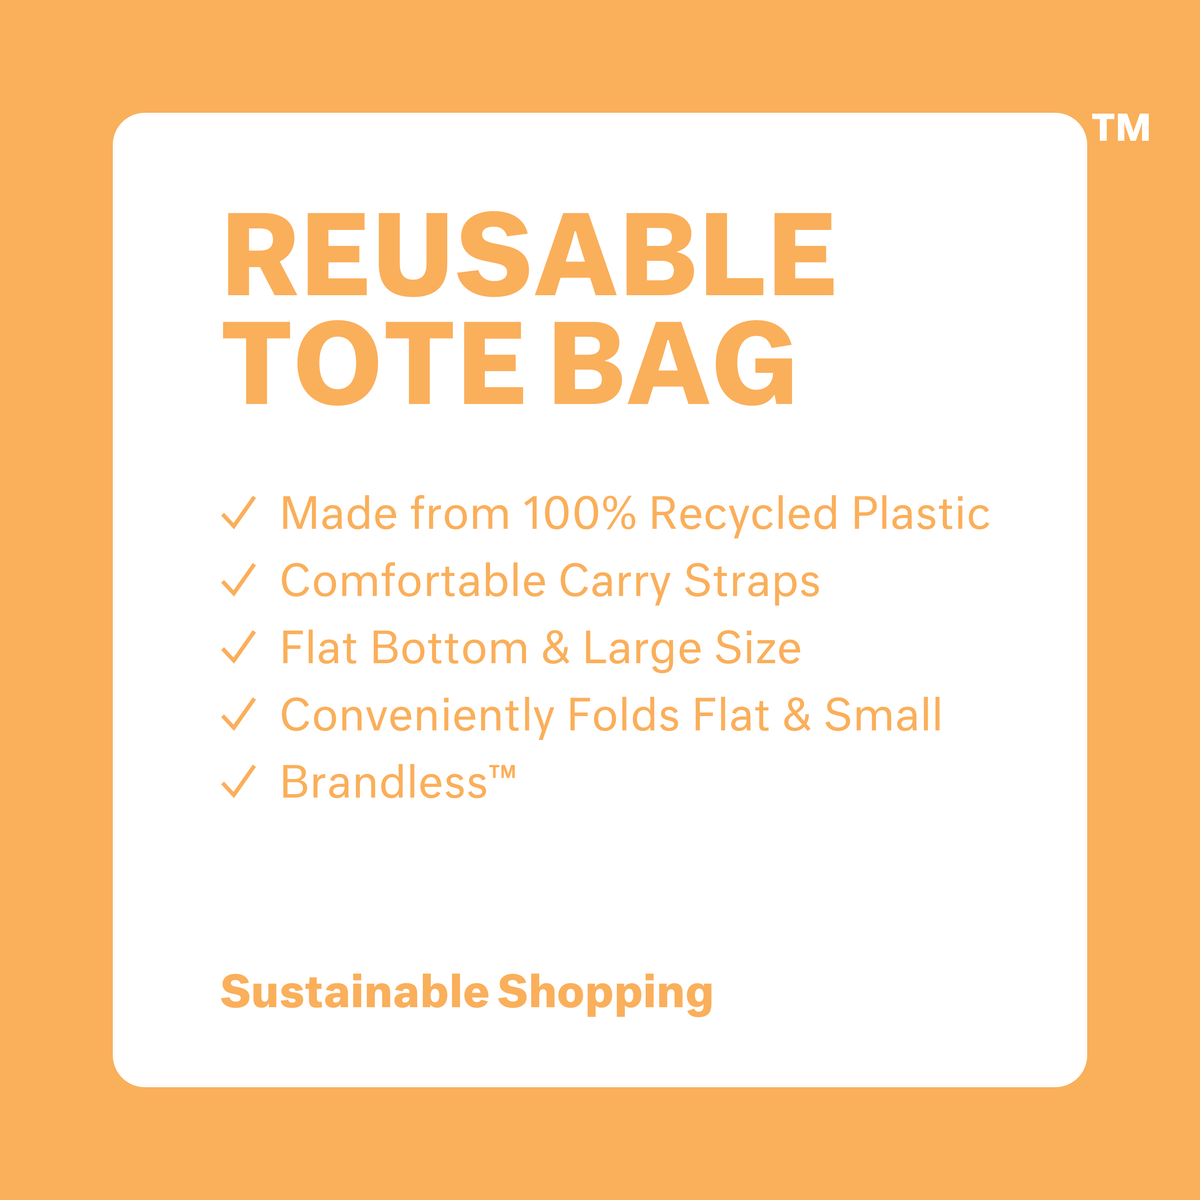 Reusable Tote Bag: Made from 100% recycled plastic. Comfortable carry straps. Flat bottom and large size. Conveniently folds flat and small. Brandless. Sustainable Shopping. Set of 2 bags.